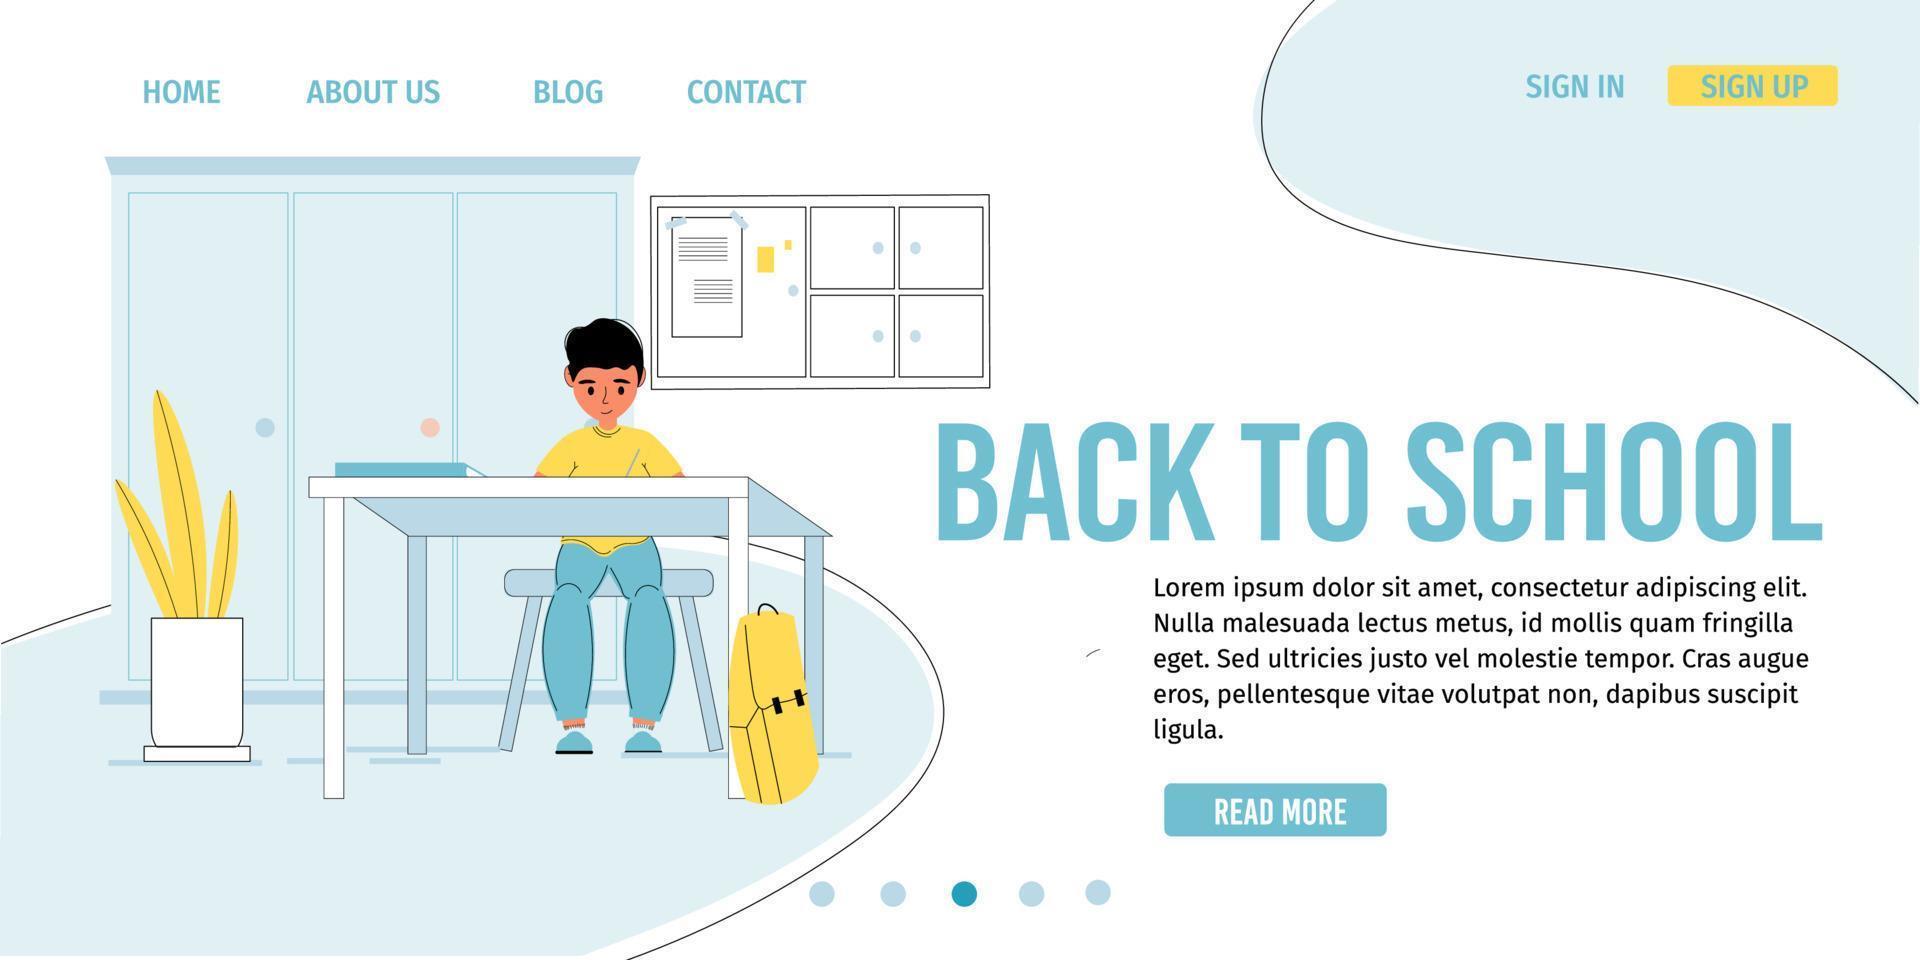 Back to school for getting knowledge landing page vector